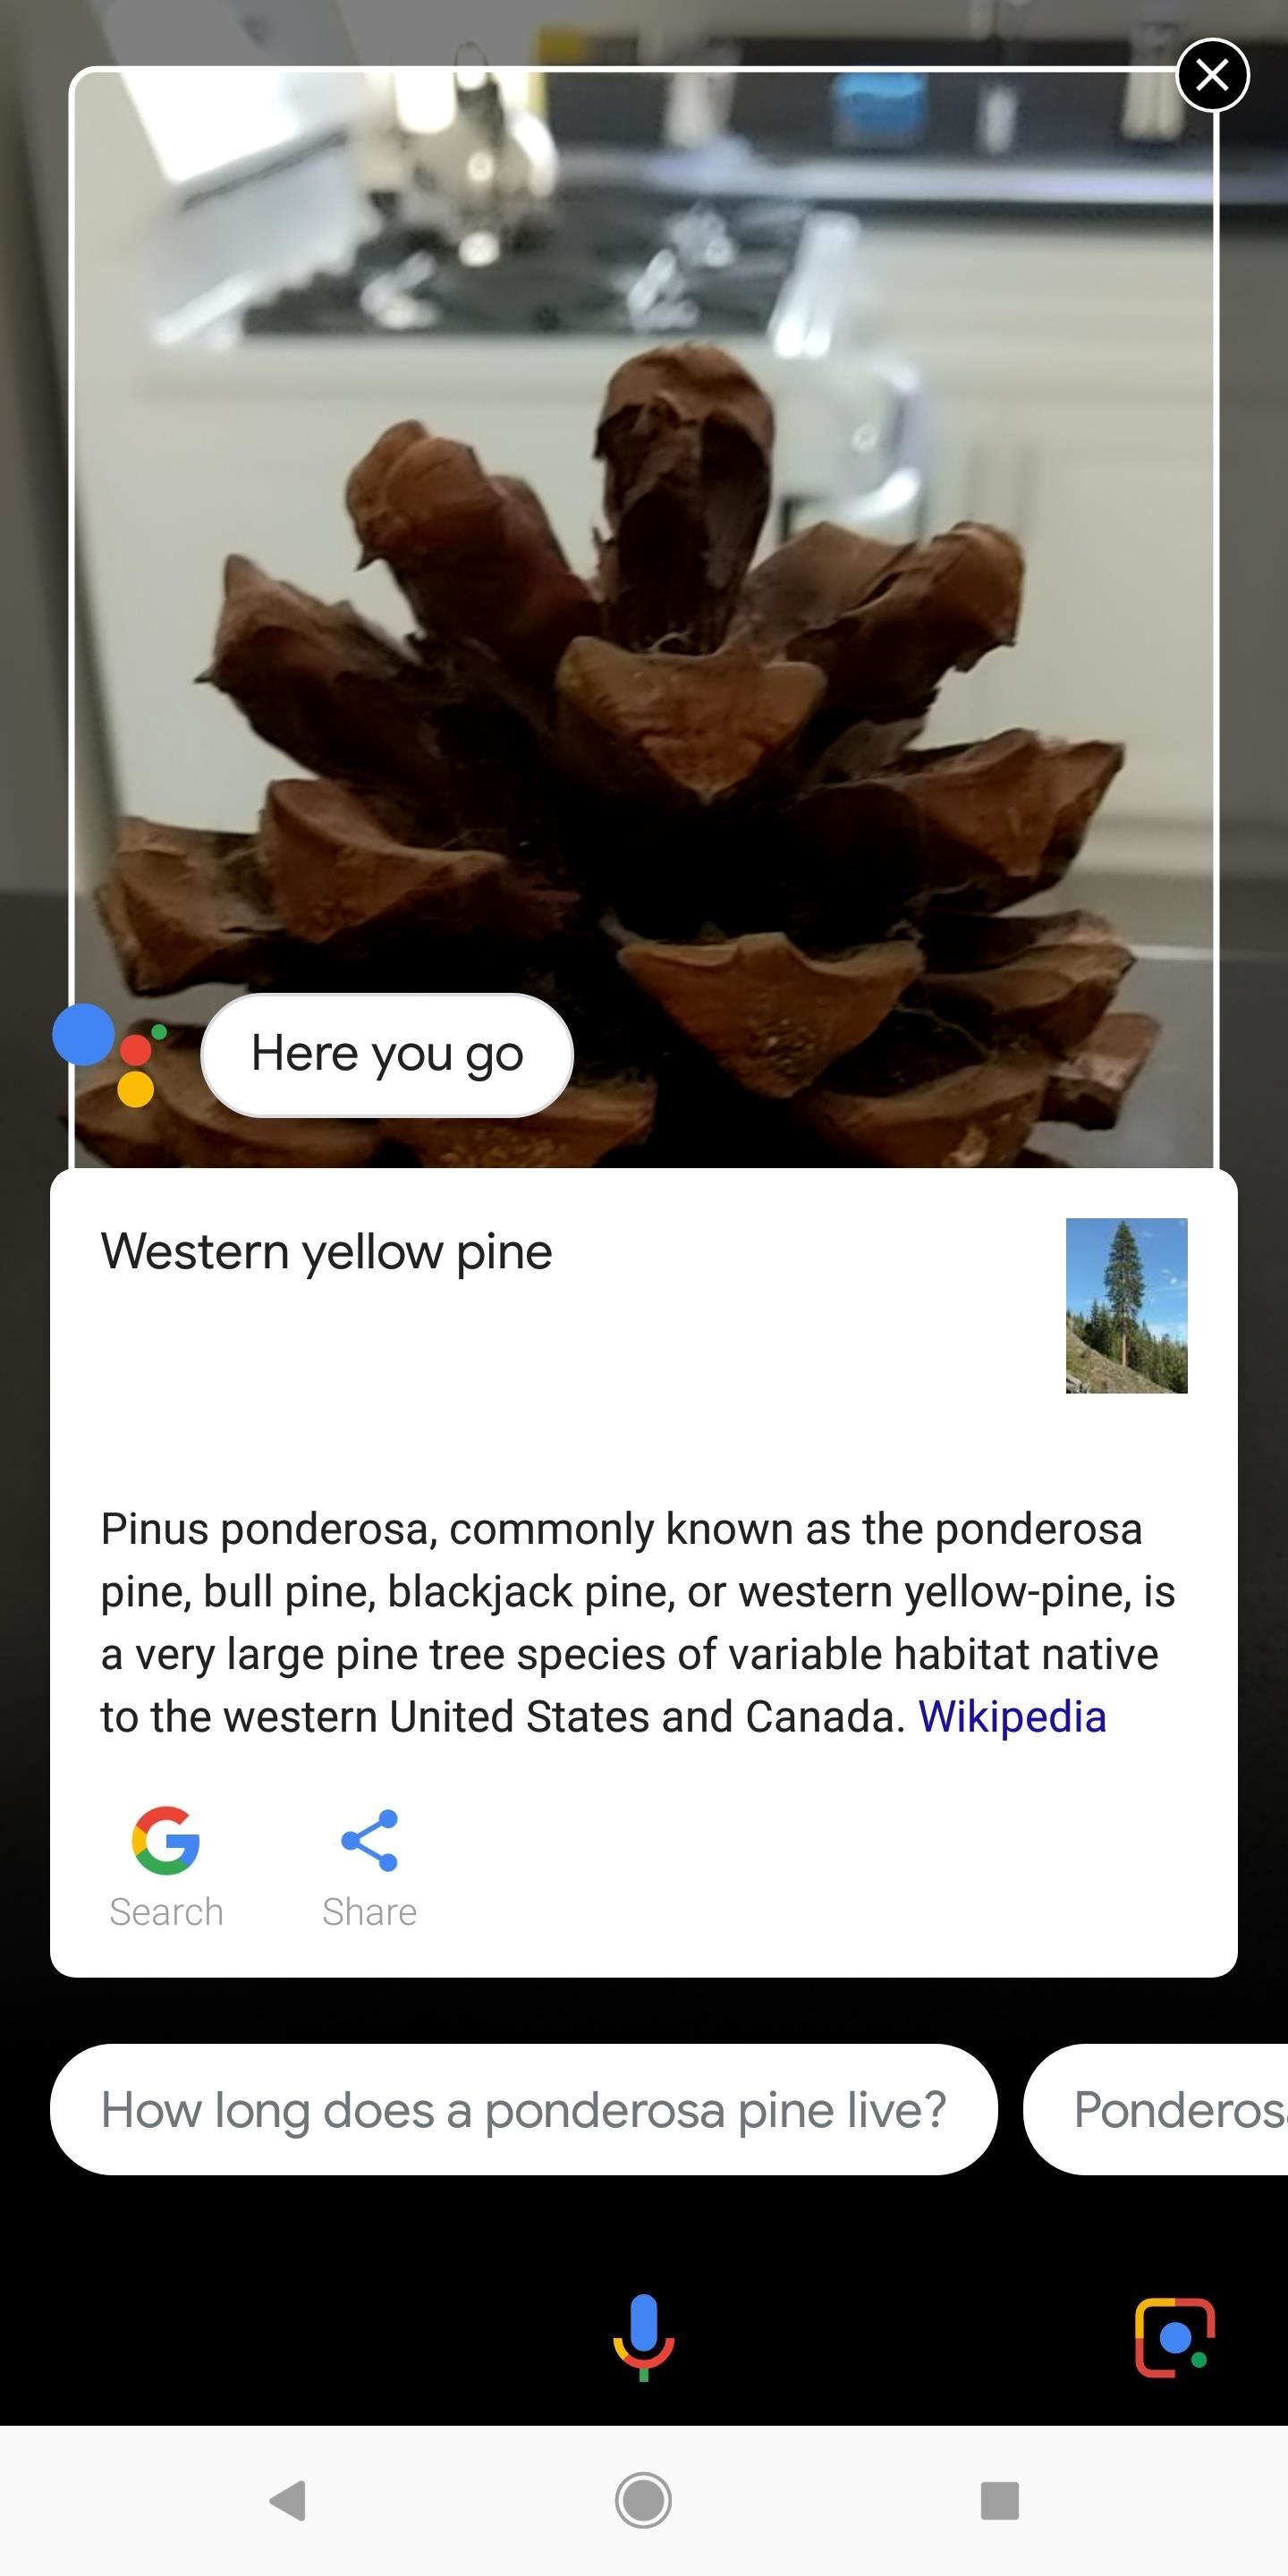 Everything You Should Know About Google Lens on the Pixel & Pixel 2